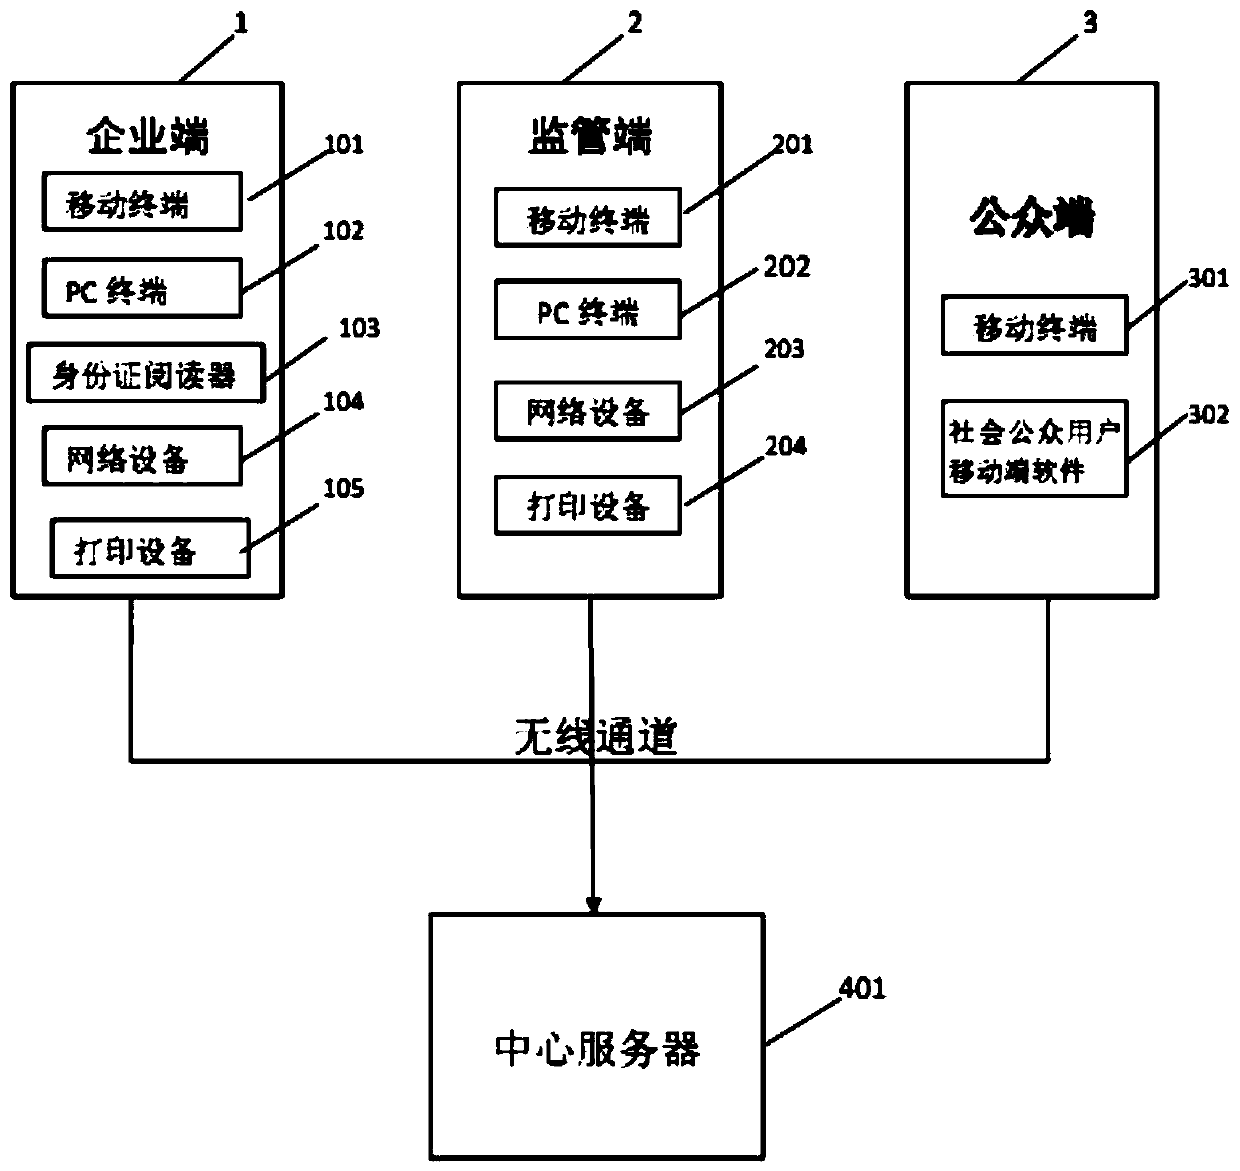 Intelligent cloud platform system and method for safety production supervision in firework and firecracker industry